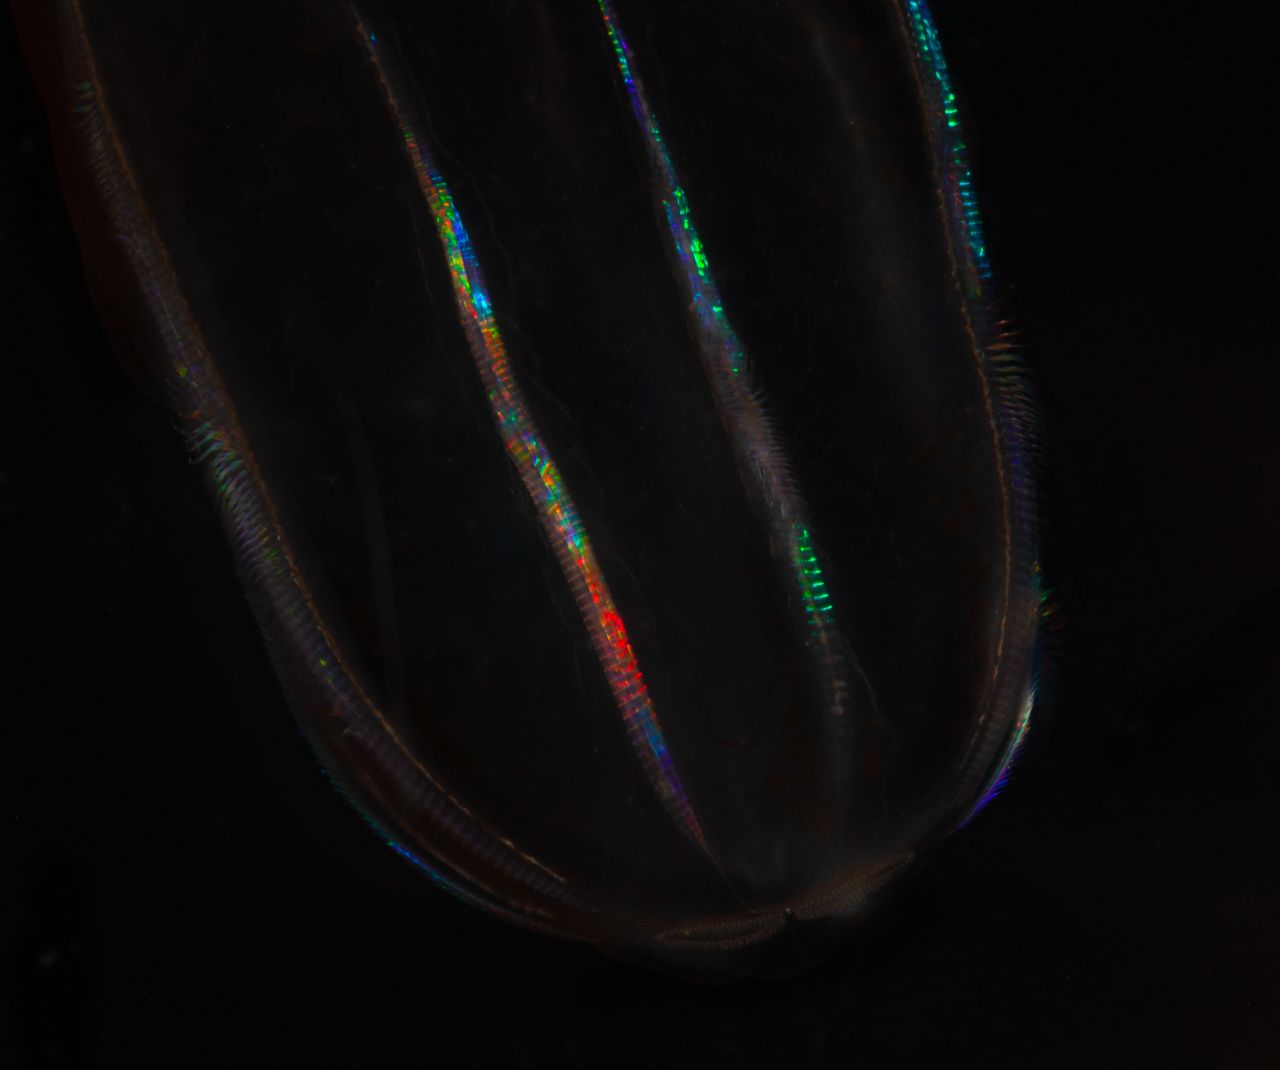 <strong>Ctenophore -- </strong>These comb-like creatures are bioluminescent and move around via eight rows of <a href="https://www.britannica.com/science/cilium" target="_blank" target="_blank">cilia</a> (narrow eyelash-like filaments), which "beat" in synchrony.